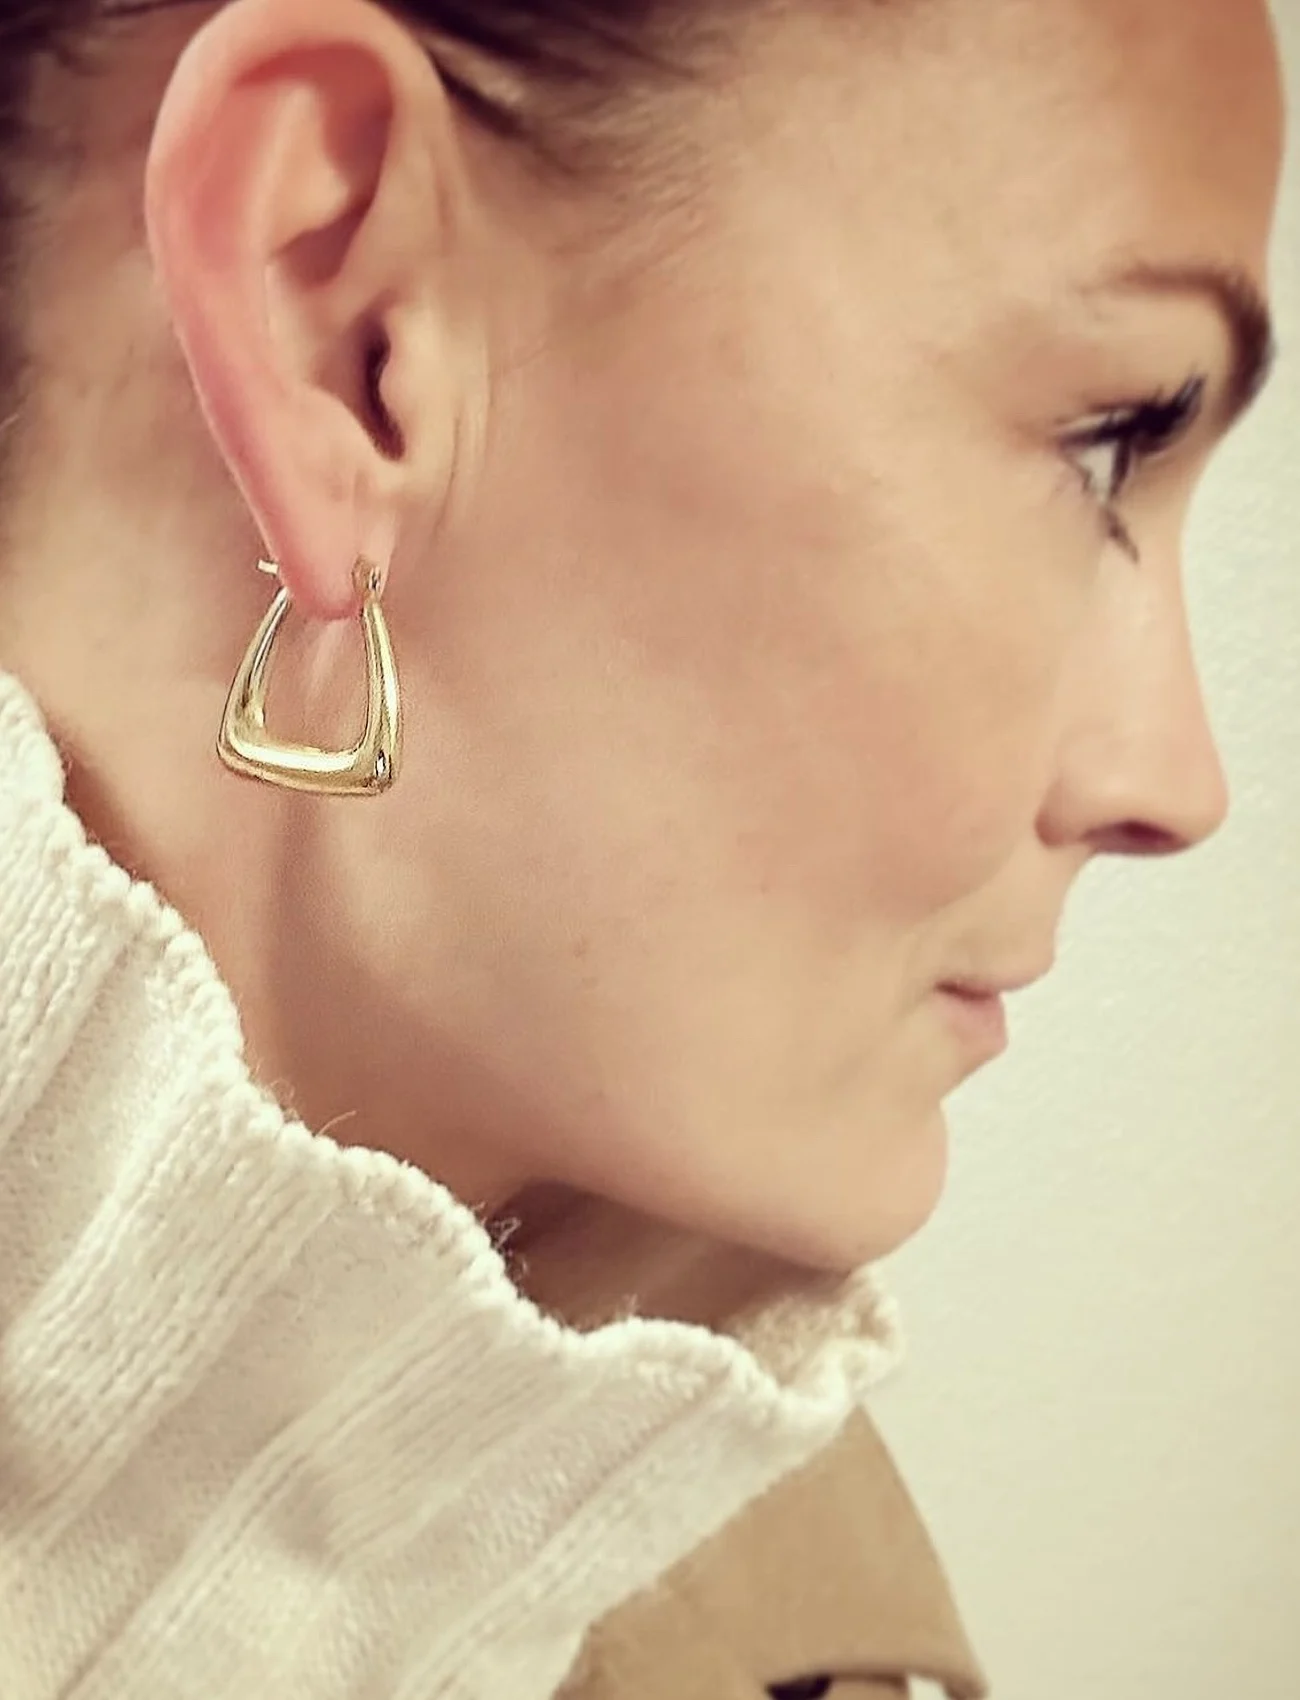 Bud to rose - Bowie Earring - creoler & hoops - gold - 1